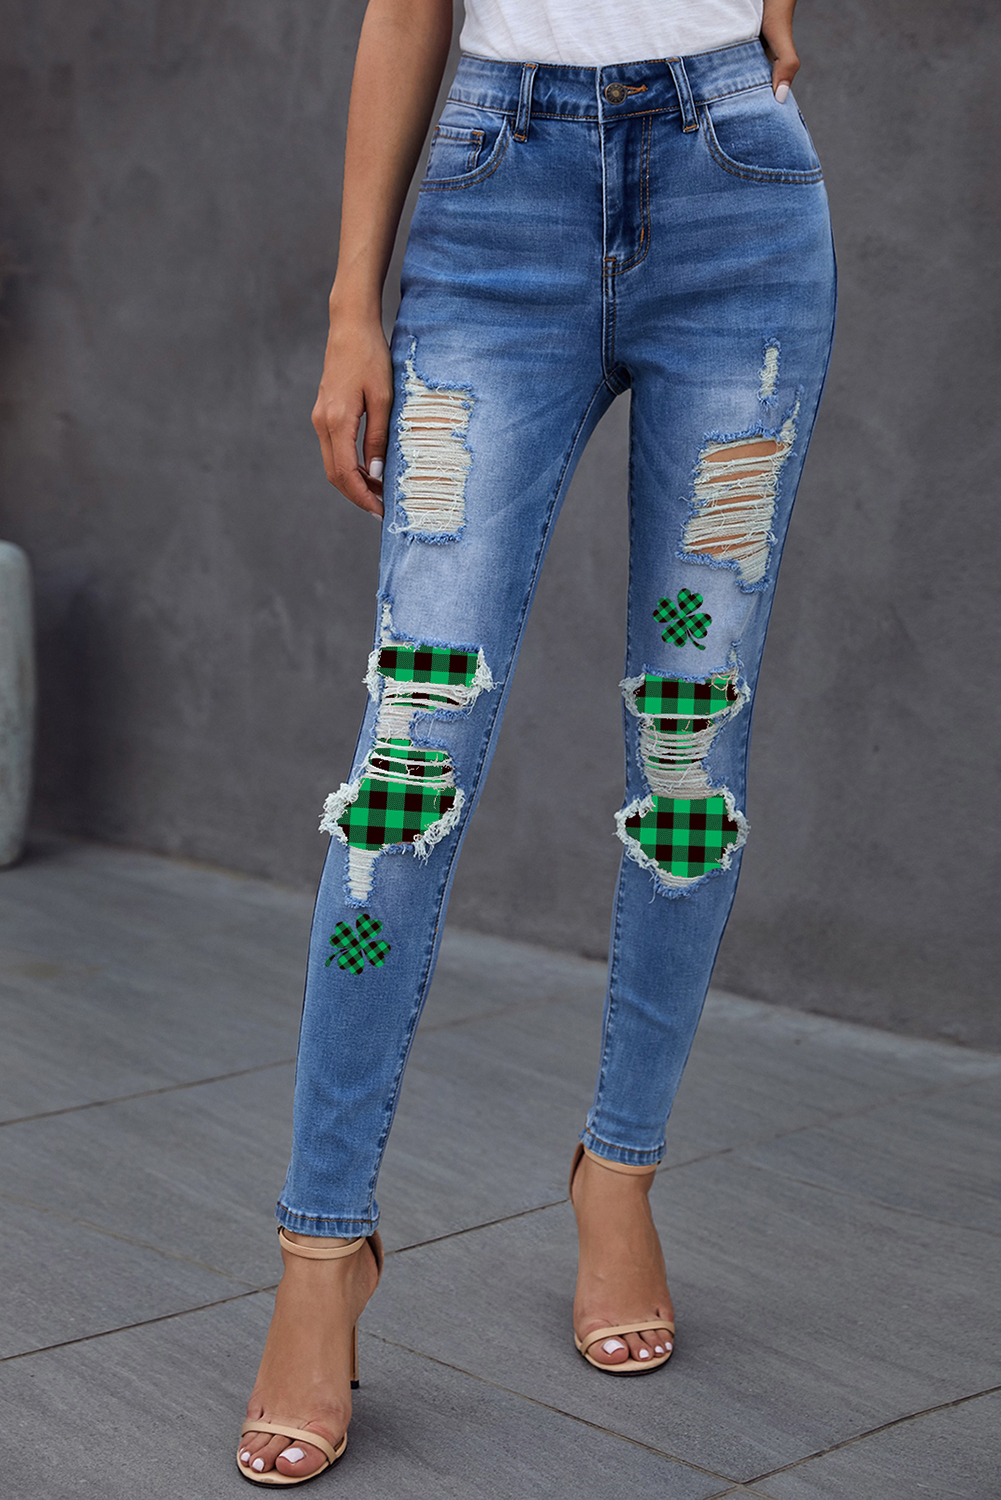 New arrivals 2023 Blue Clover Print Green Plaid PATCHES Ripped Skinny Jeans